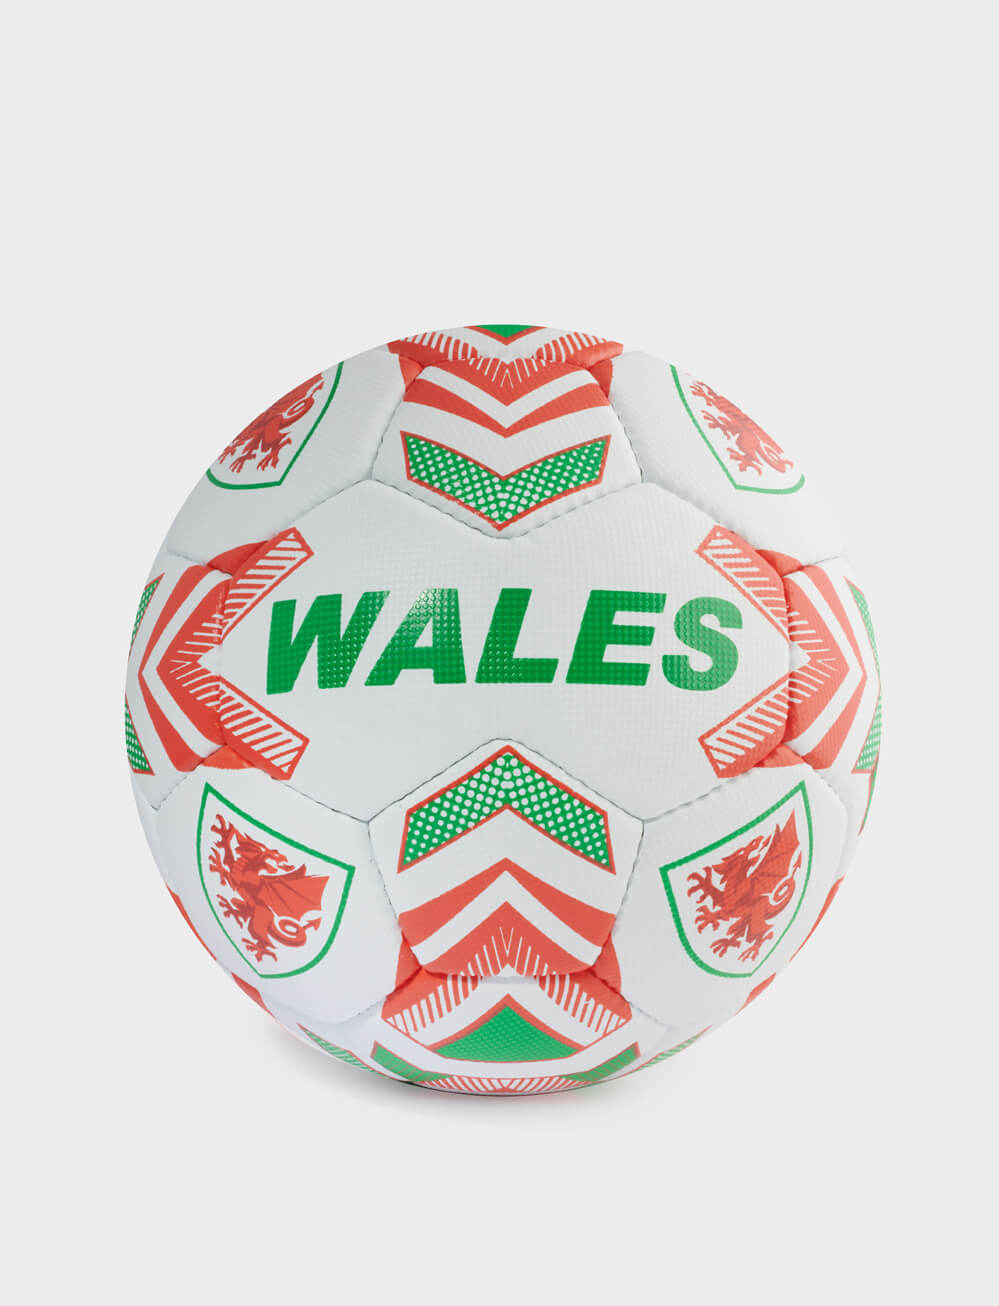 Official Team Wales Size 5 Football - The World Football Store